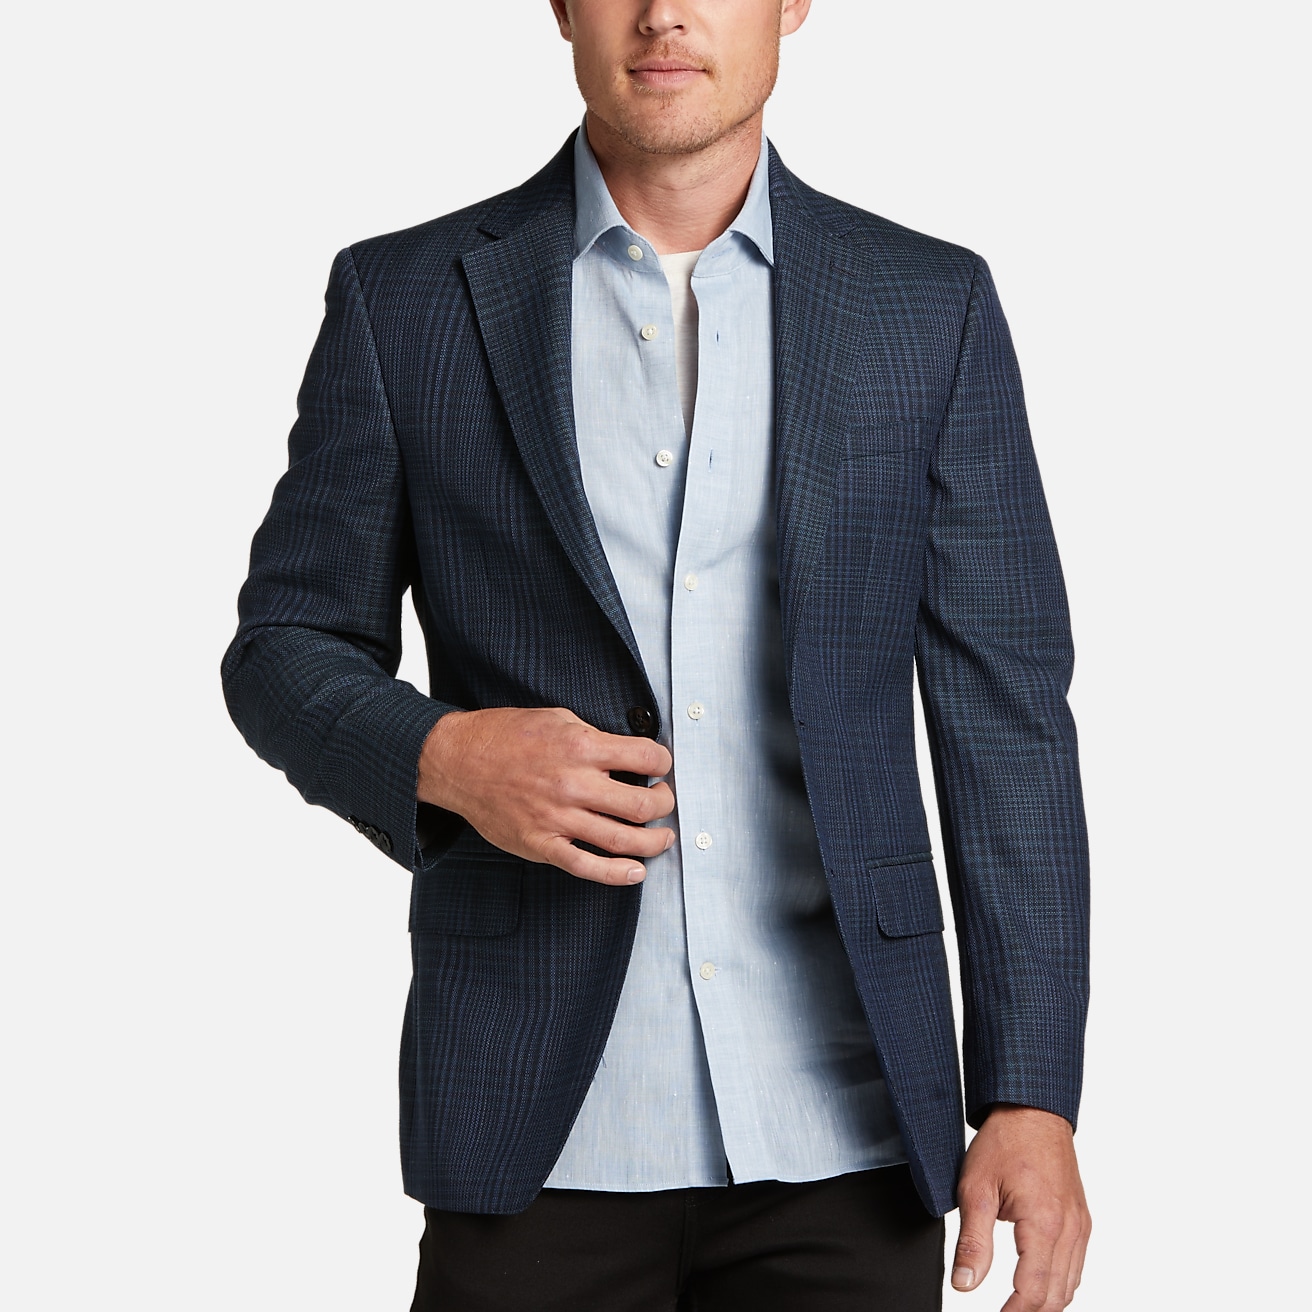 https://image.menswearhouse.com/is/image/TMW/TMW_15MV_61_CALVIN_KLEIN_SPORT_COATS_NAVY_PLAID_MAIN?imPolicy=pdp-mob-2x